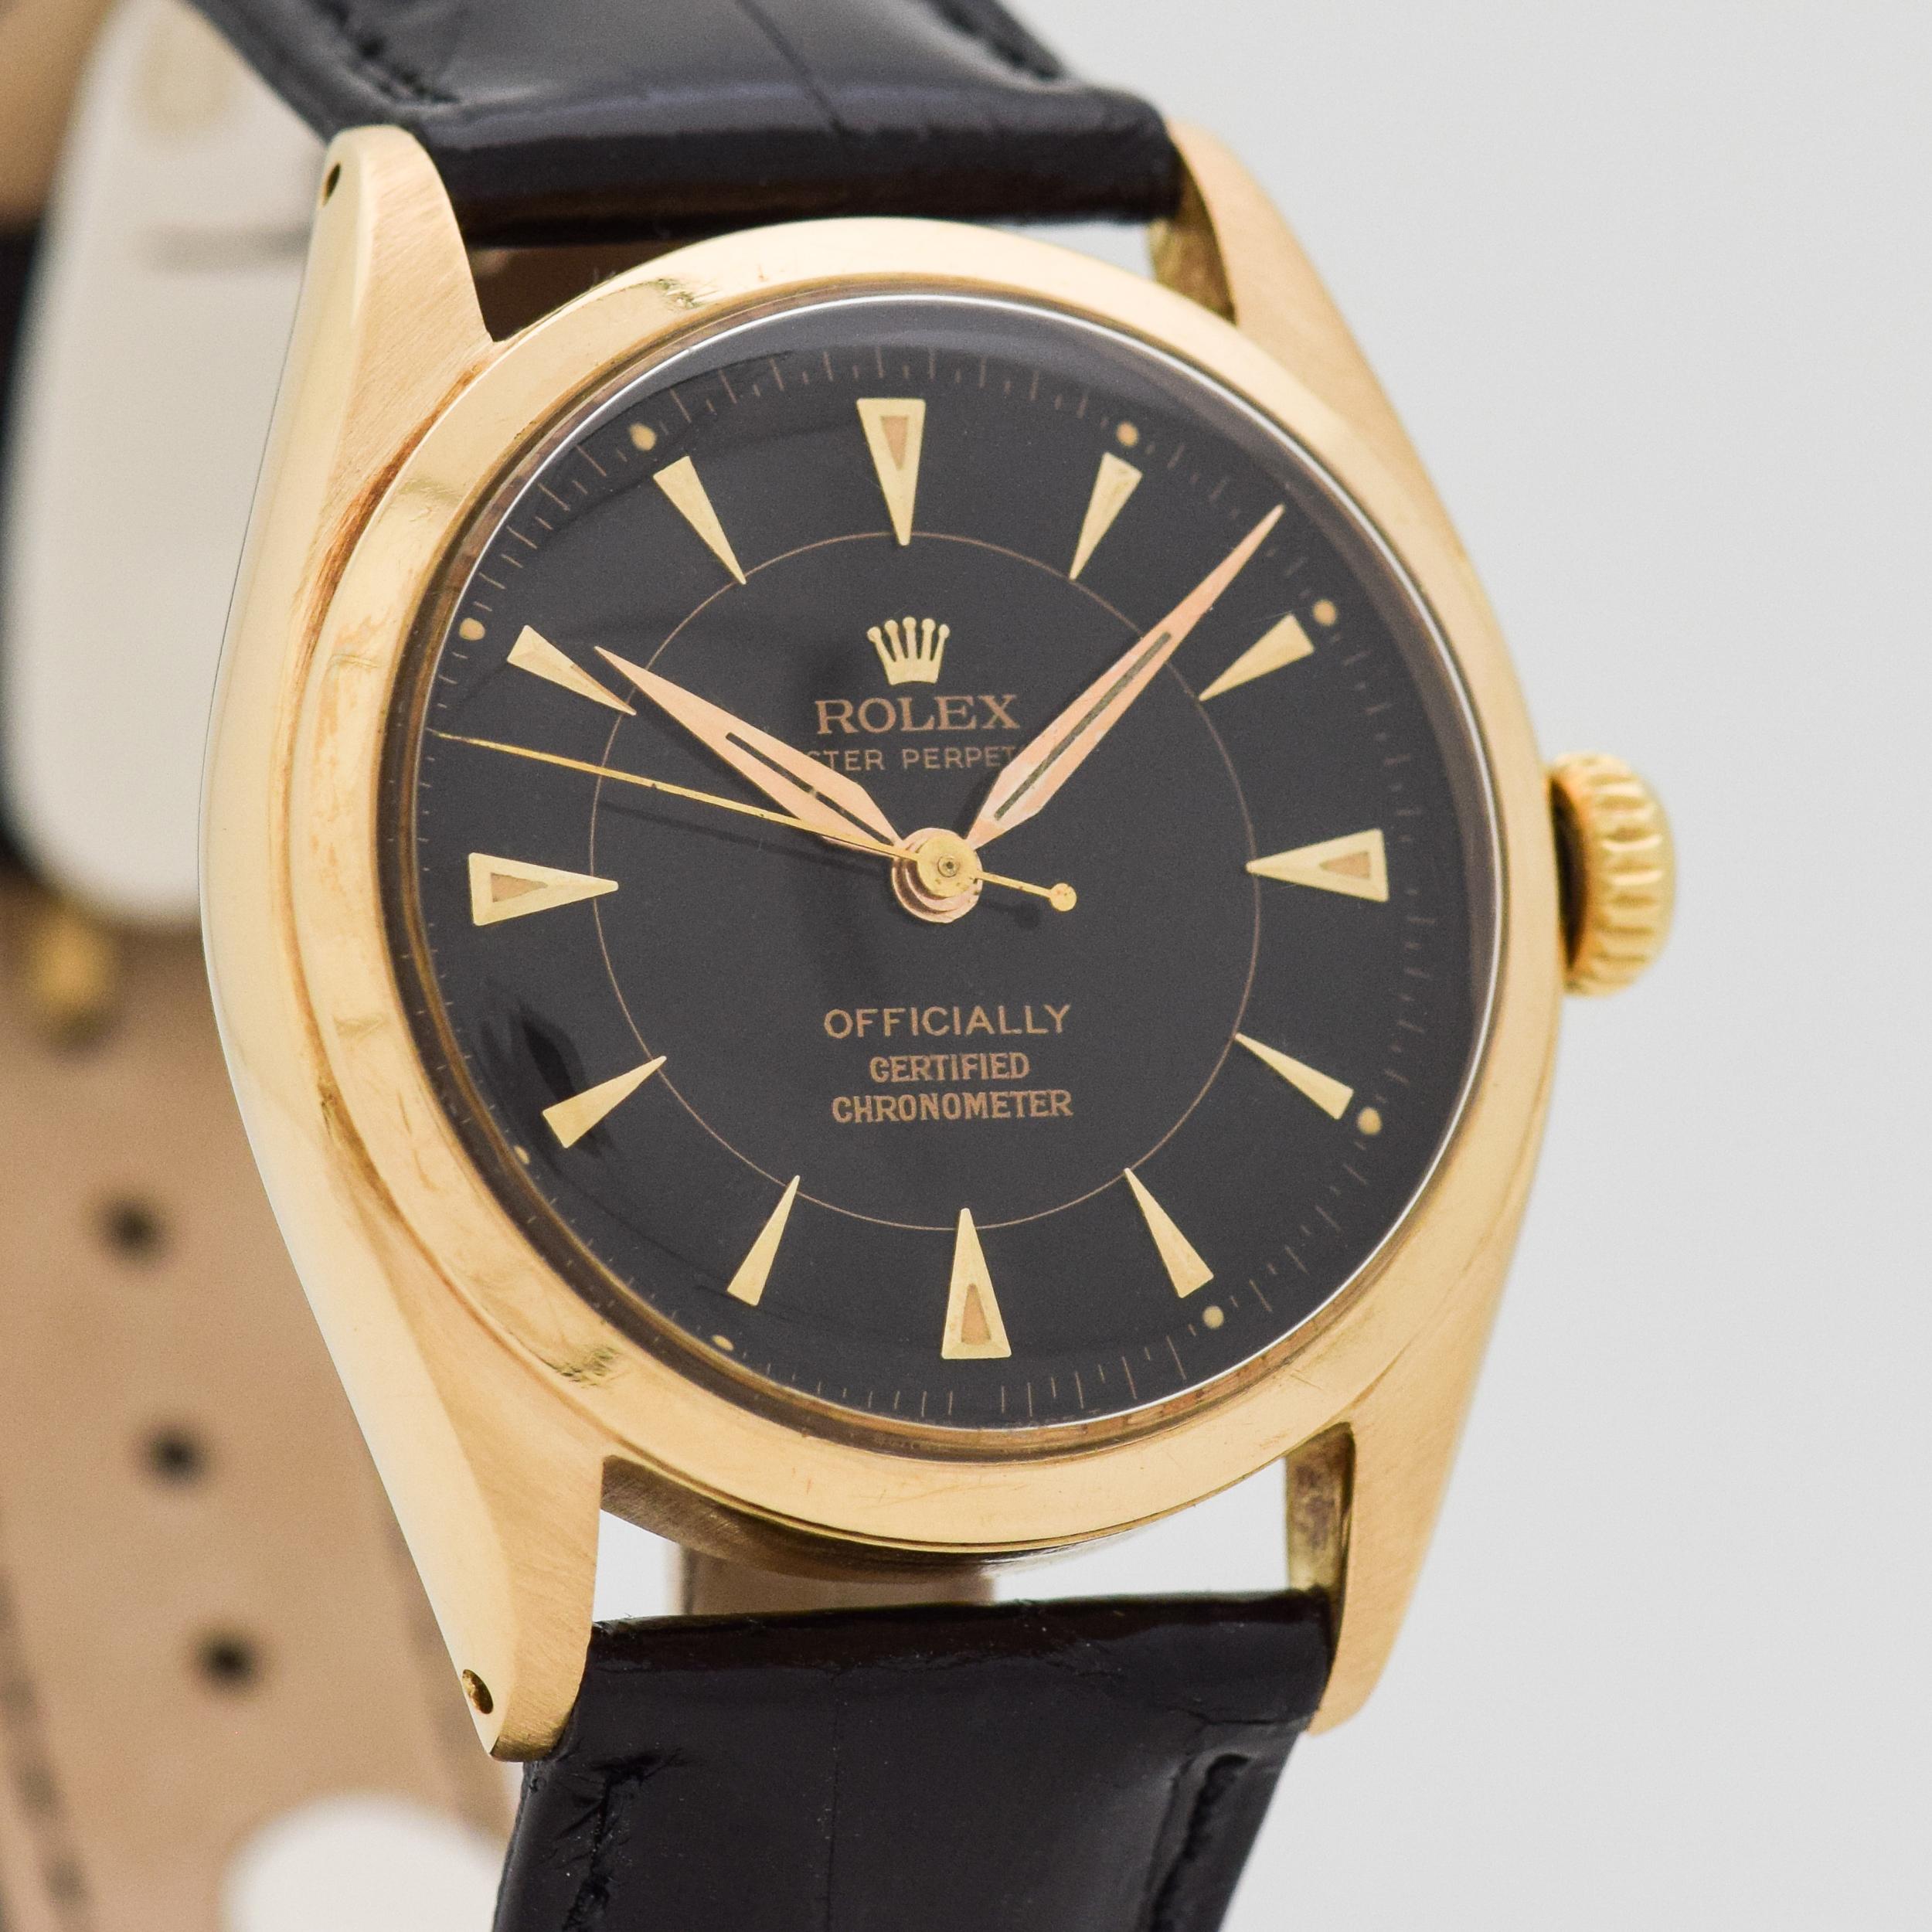 1951 Vintage Rolex Oyster Perpetual Reference 6084. 18K Yellow Gold case. Case size, 34mm wide. Black dial with applied, yellow gold-colored, arrow markers. Powered by a 17-jewel, automatic caliber movement. Equipped with a Glossy, Black-colored,